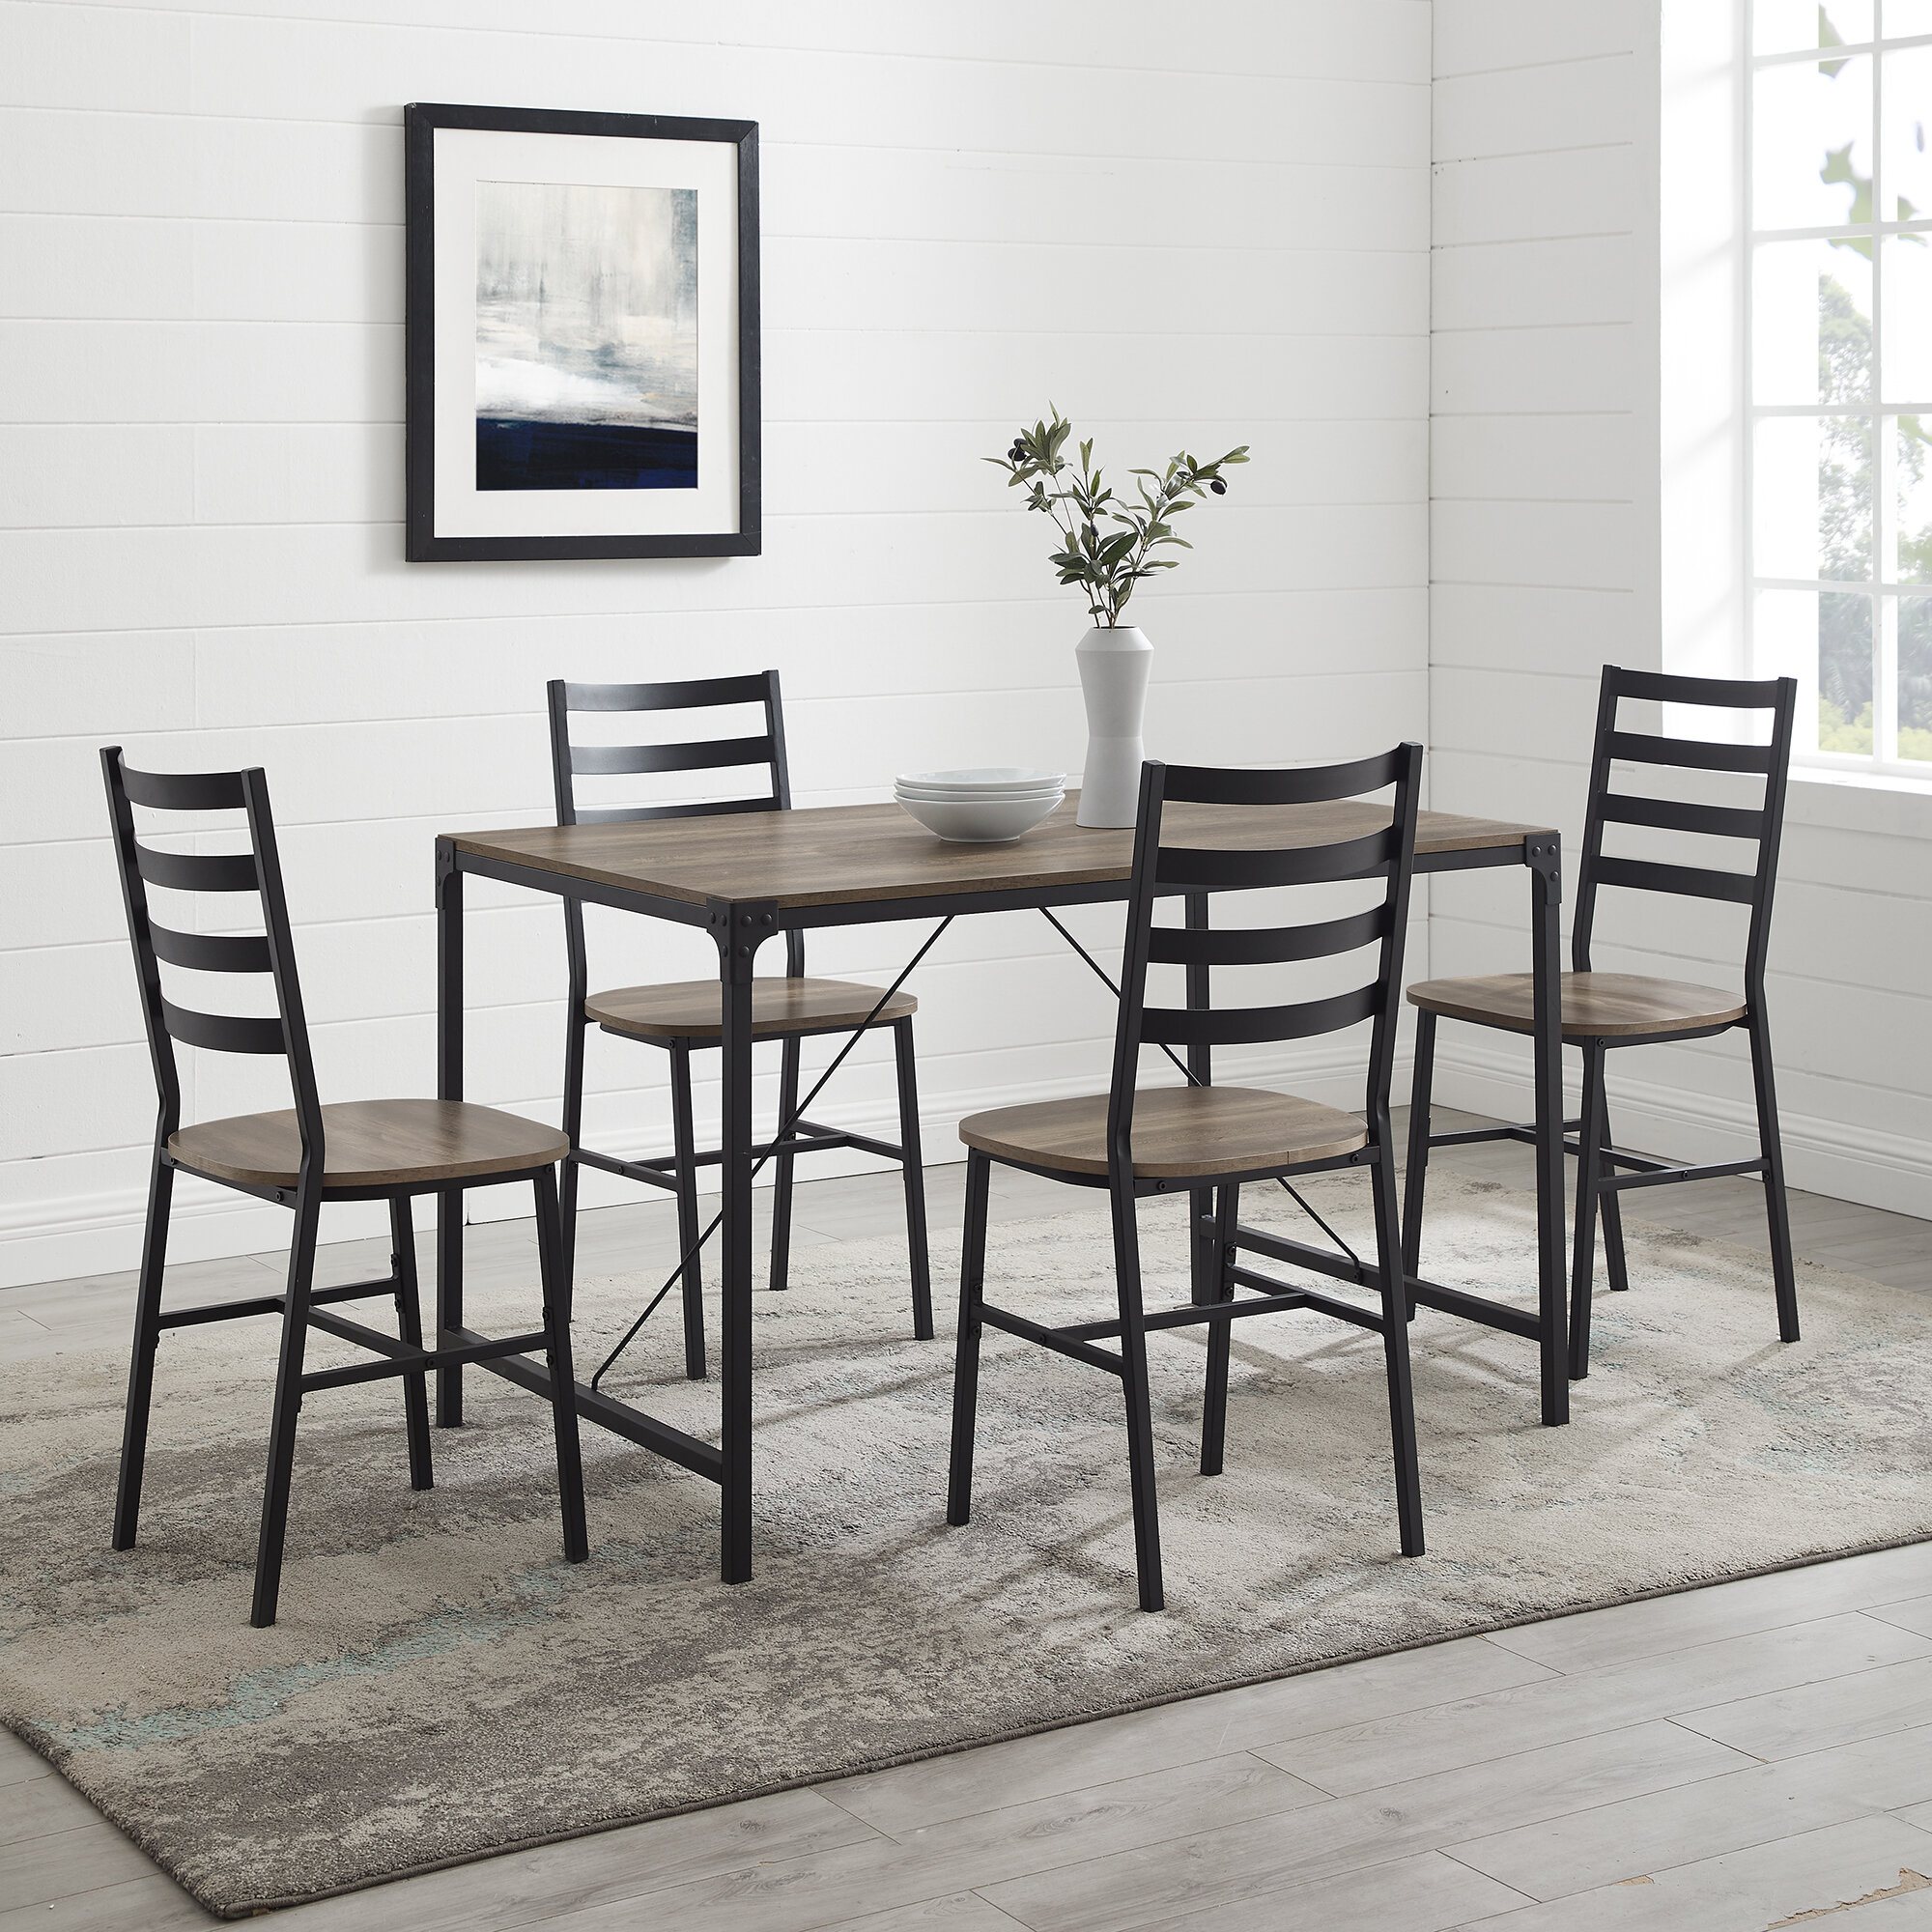 Solid Pine Wooden Dining Table and 4 Chairs Set Home Kitchen Furniture Set,White/Grey I Shape 